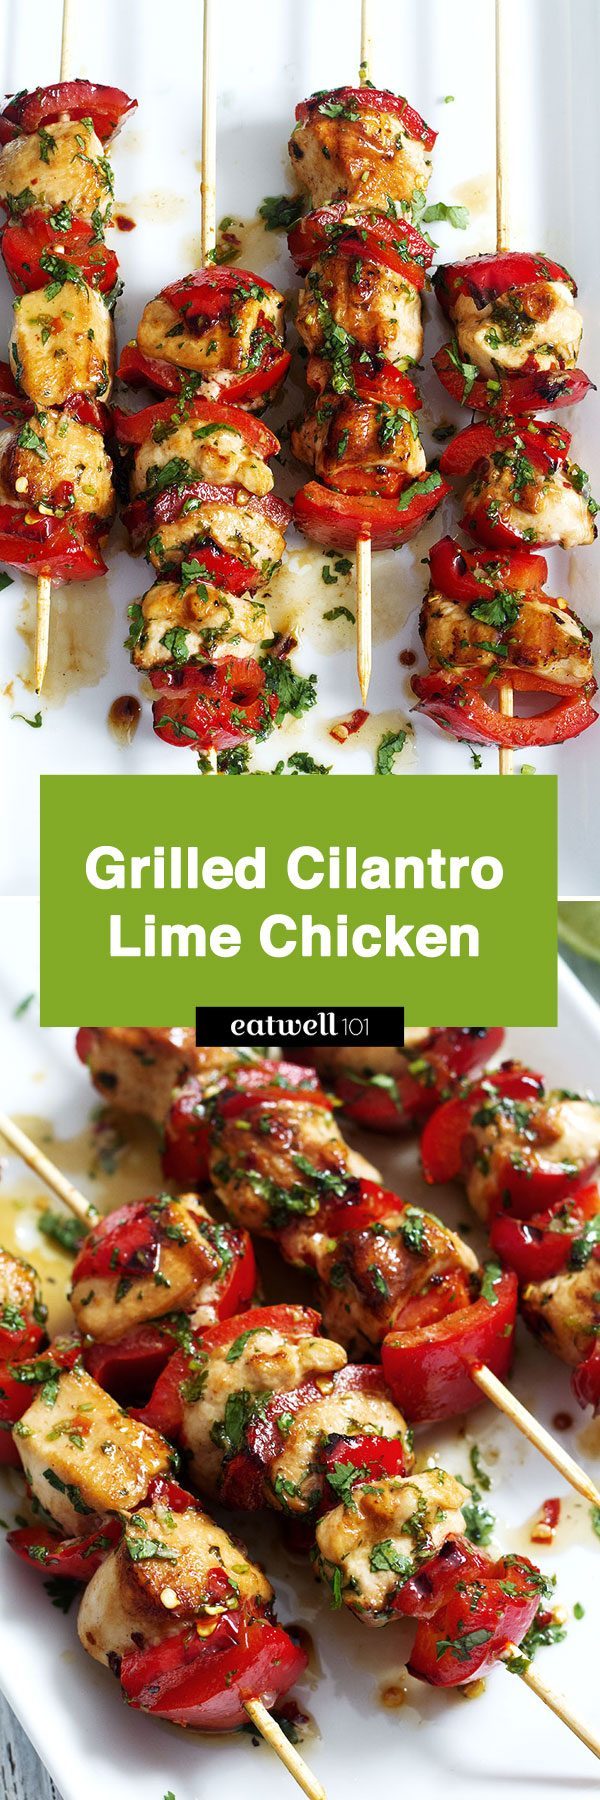 Grilled Chicken Recipe – The best and easiest marinade – No-fuss and packed with so much flavor!